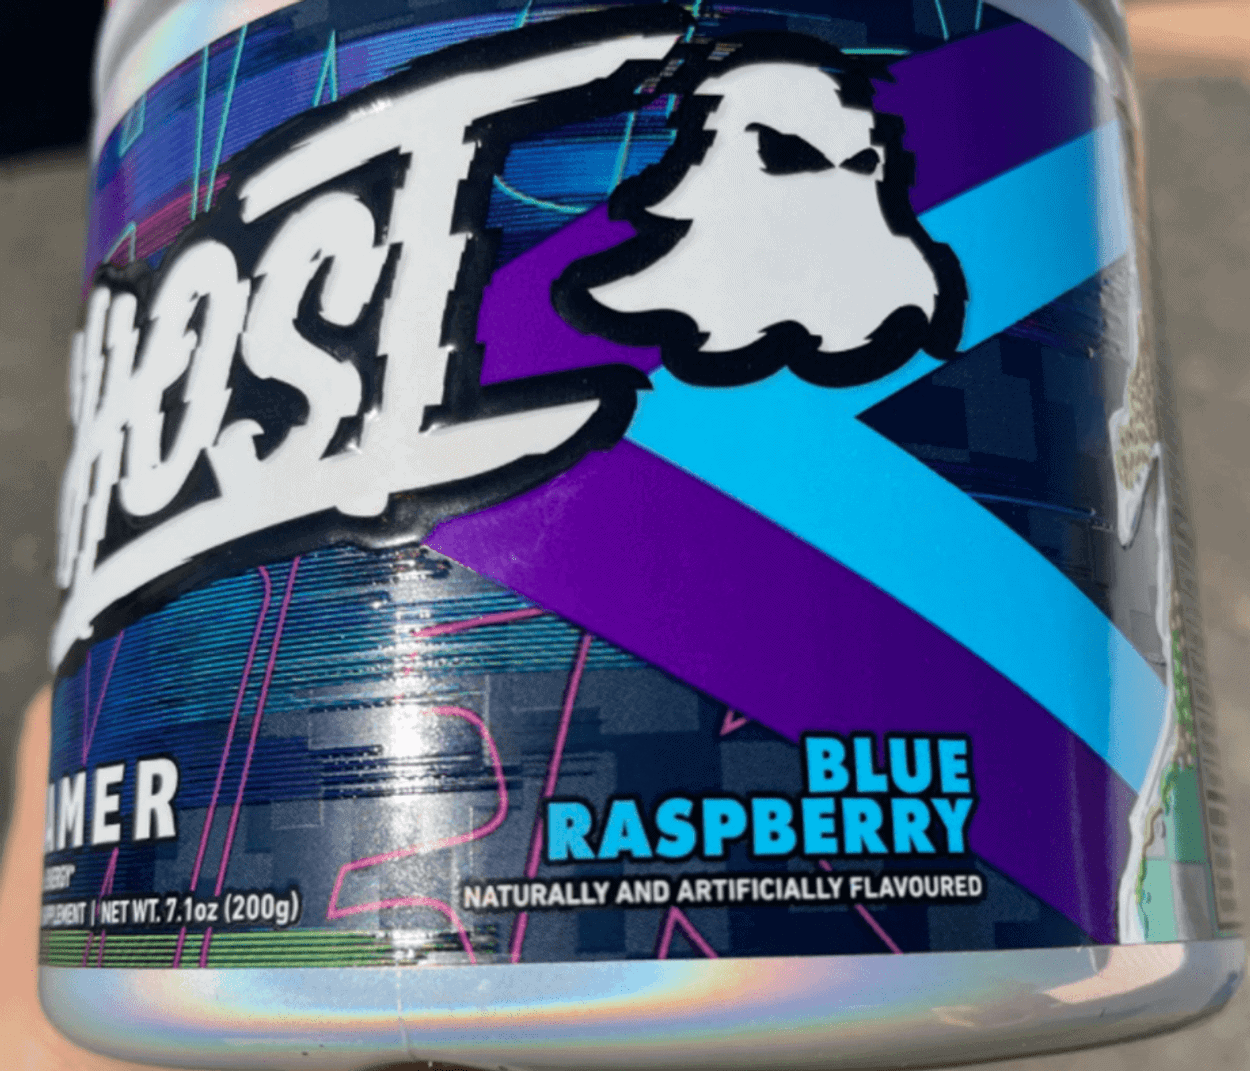 A tub that includes the blue raspberry flavor of Ghost Gamer.